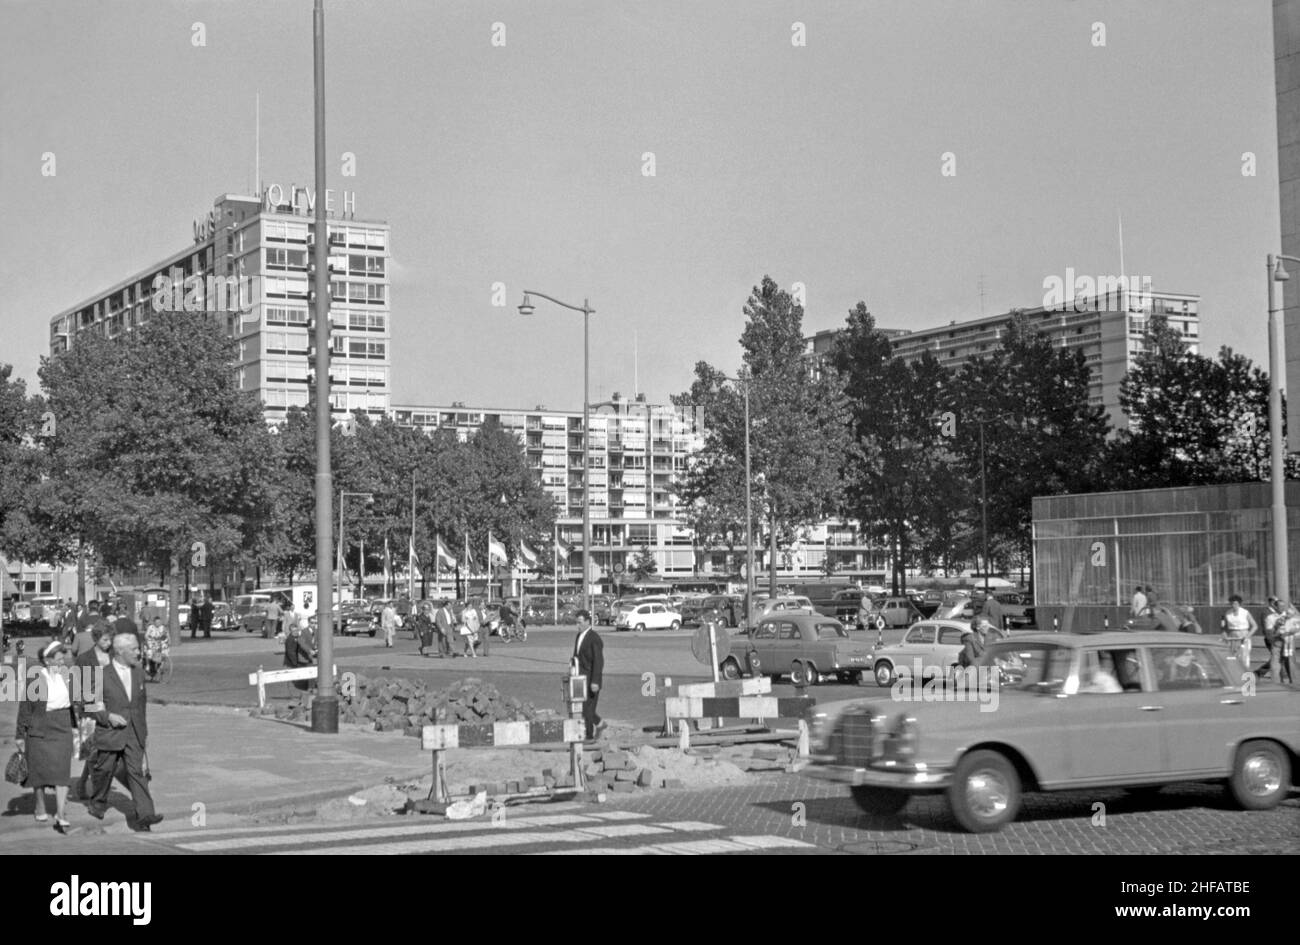 A view across Schouwburgplein of the apartment blocks along Karel Doormanstraat, the (de) Lijnbaan, Rotterdam, the Netherlands in the 1960s. The layout of the residential development, which opened in the late 1950s, separated shops from apartments and were arranged around green courtyards. It was designed by the firm Van den Broek & Bakema led by architects Jo van den Broek and Jacob B (Jaap) Bakema. Today this area completely pedestrianised – a vintage 1960s photograph. Stock Photo